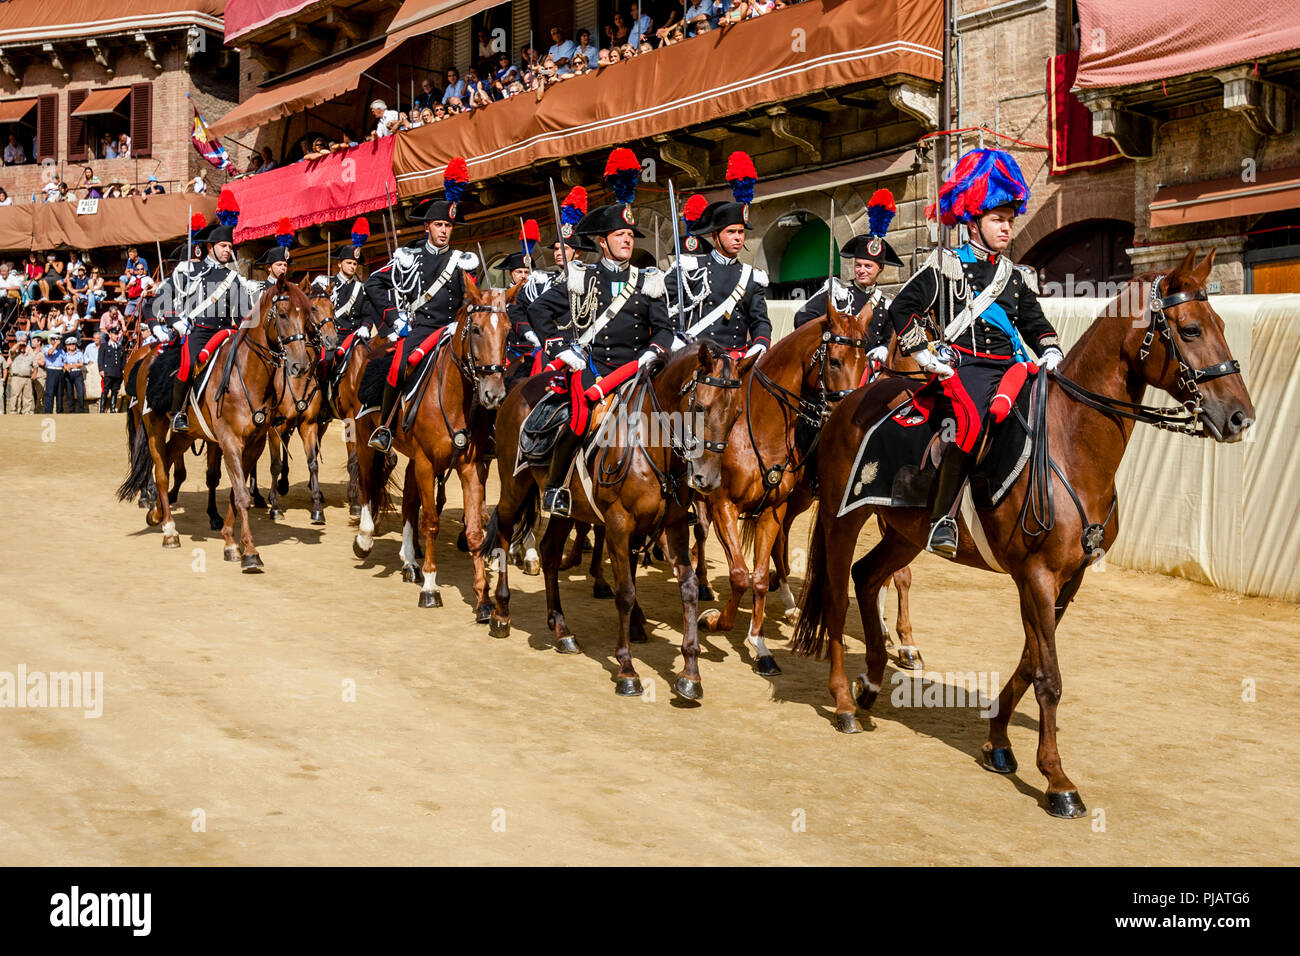 The Mounted Section Of The Italian Carabinieri (Police Force) Prepare To Race Around The Track Before The Start Of The Palio di Siena, Siena, Italy Stock Photo